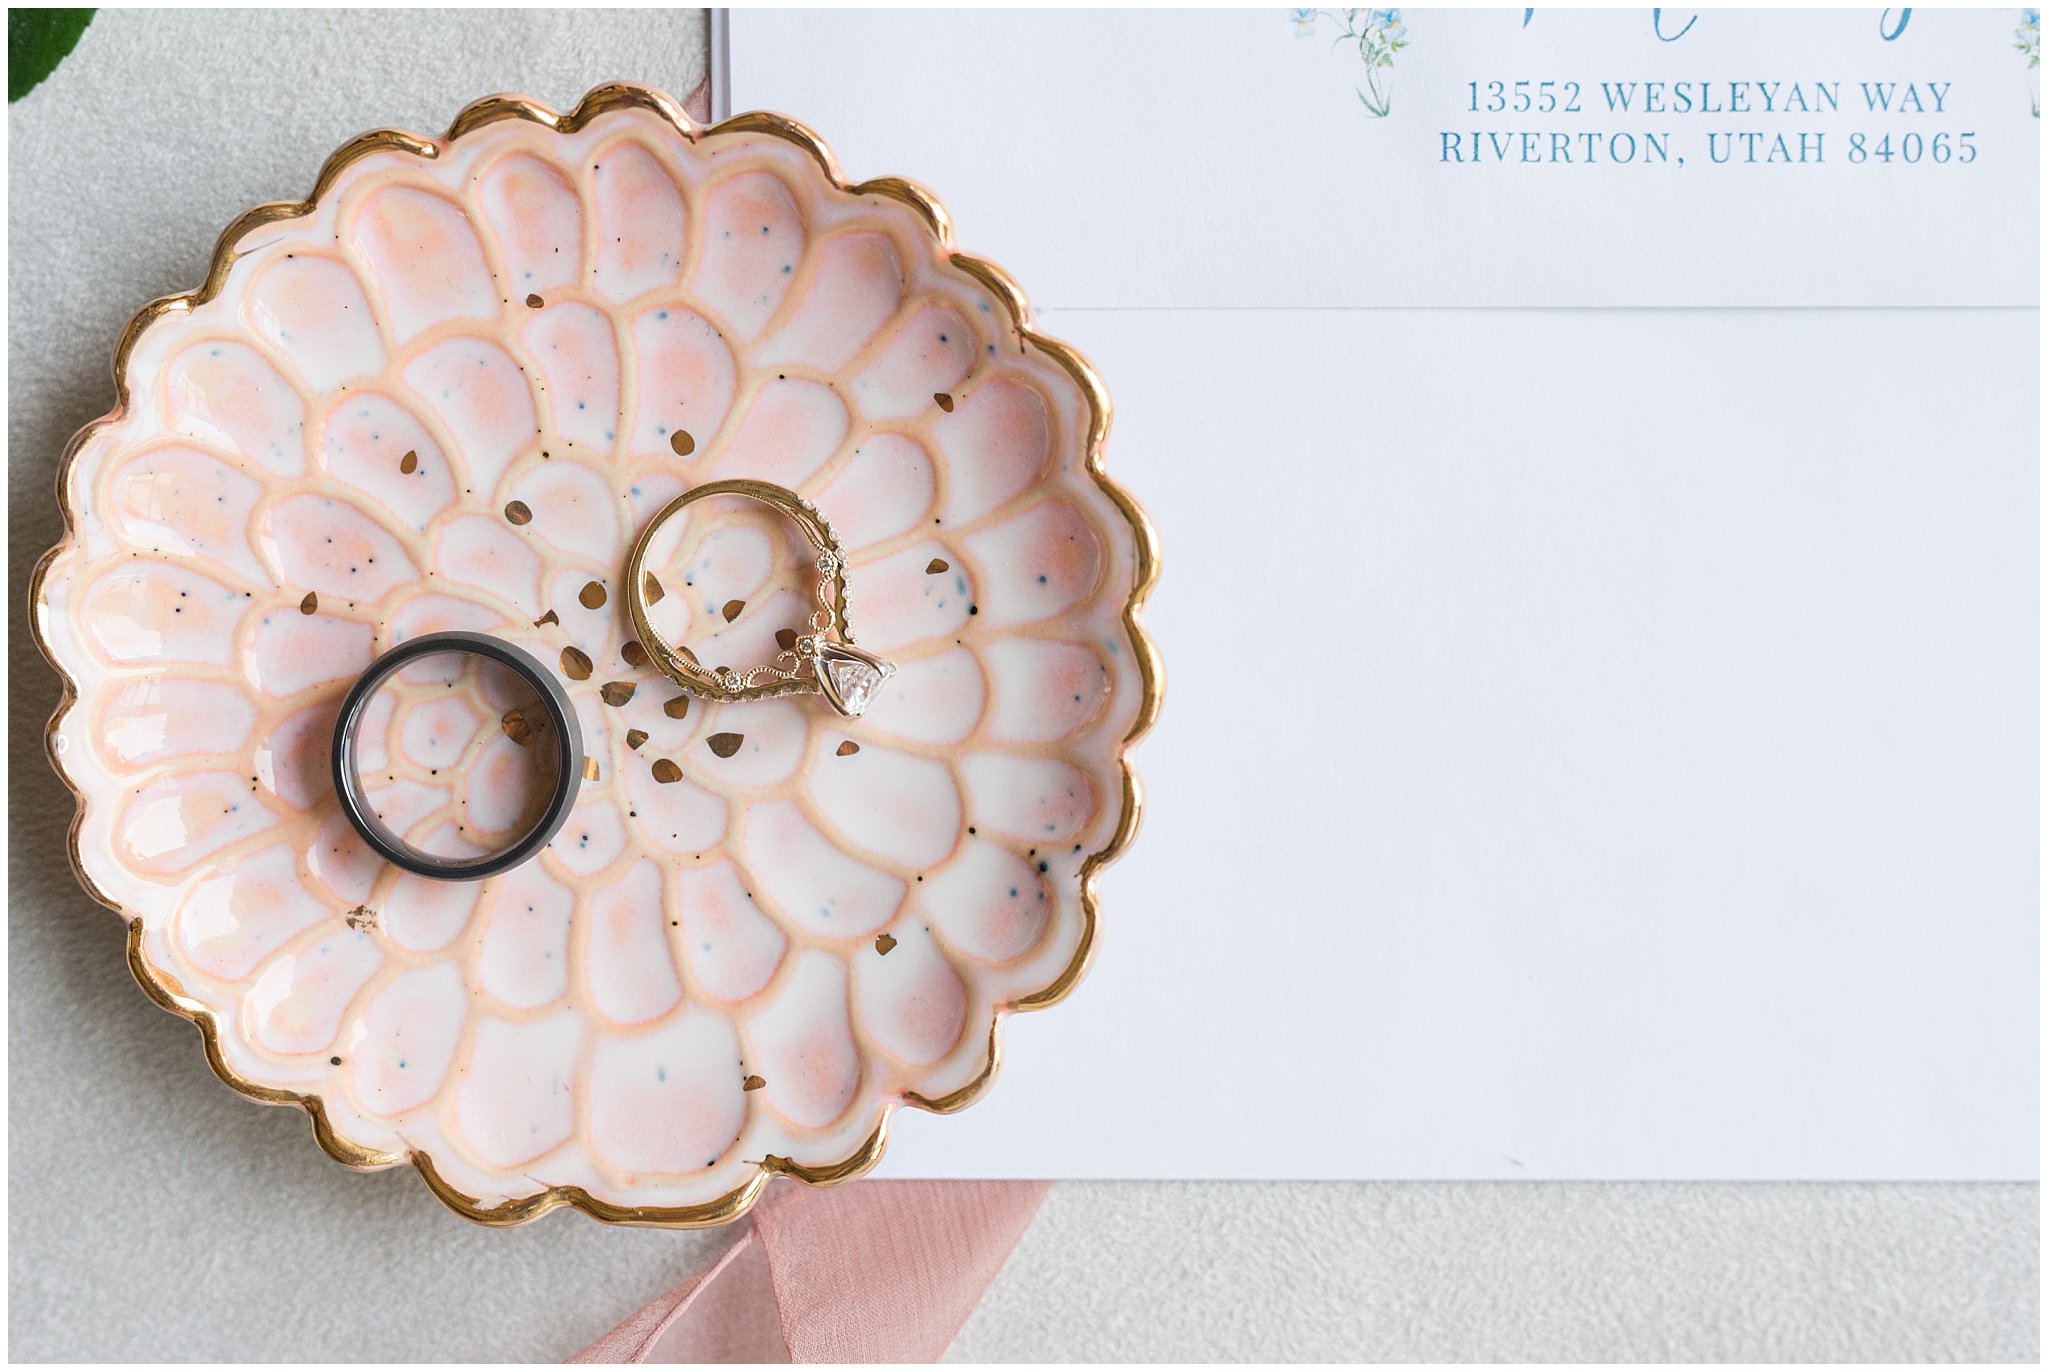 Invitation suite and wedding rings on blush dish | Wadley Farms Summer Wedding | Jessie and Dallin Photography